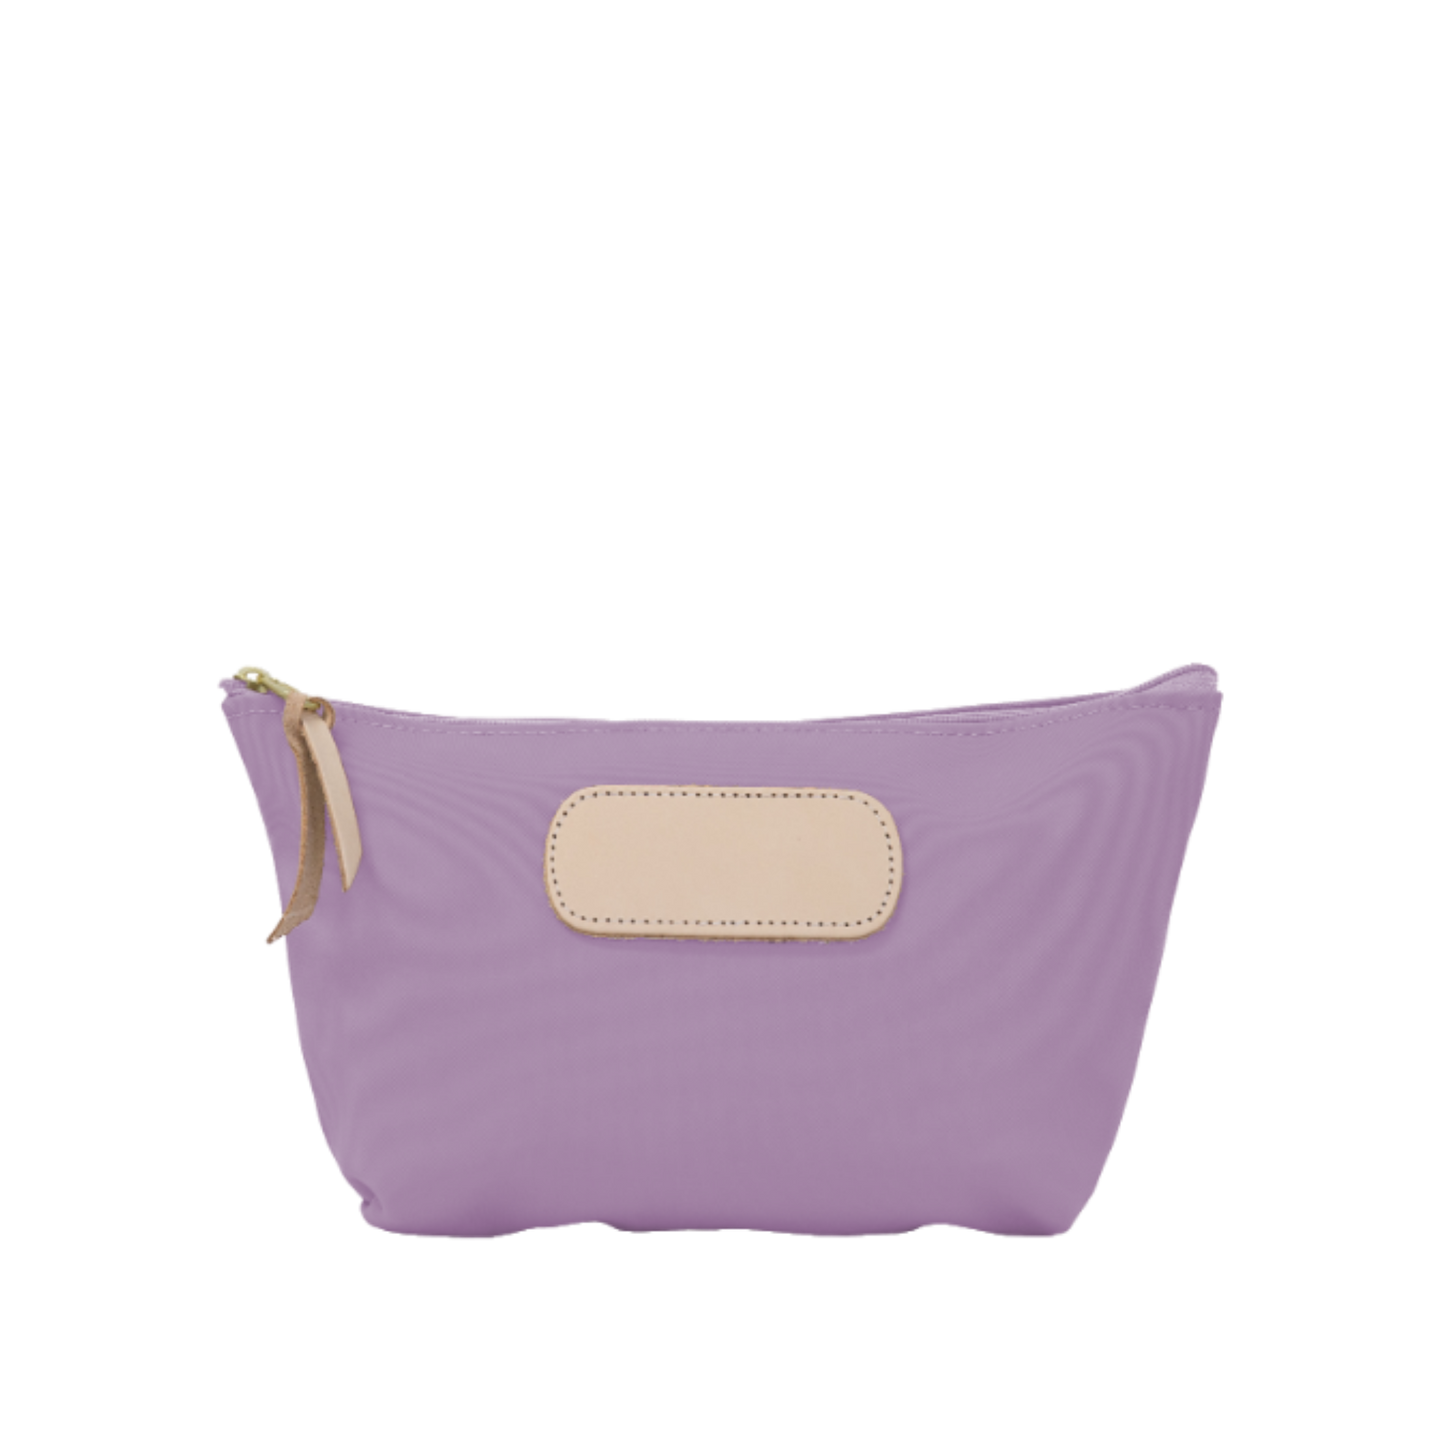 Grande - Lilac Coated Canvas Front Angle in Color 'Lilac Coated Canvas'